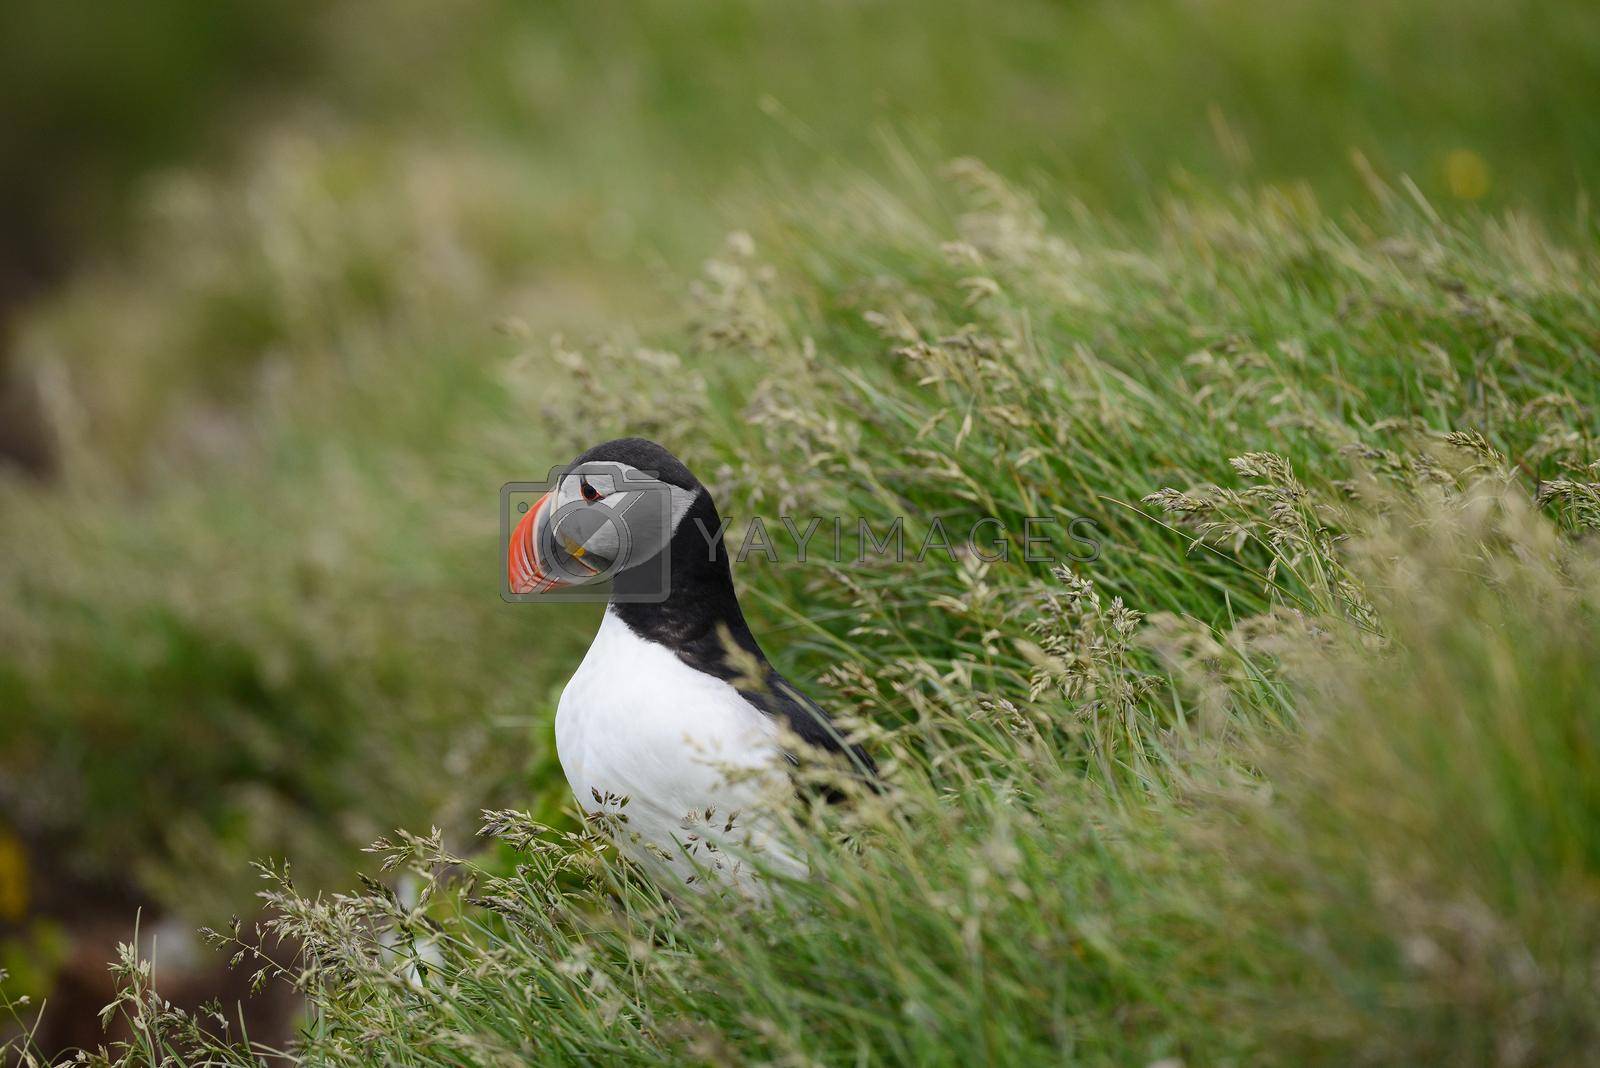 Royalty free image of Puffin from Iceland by porbital